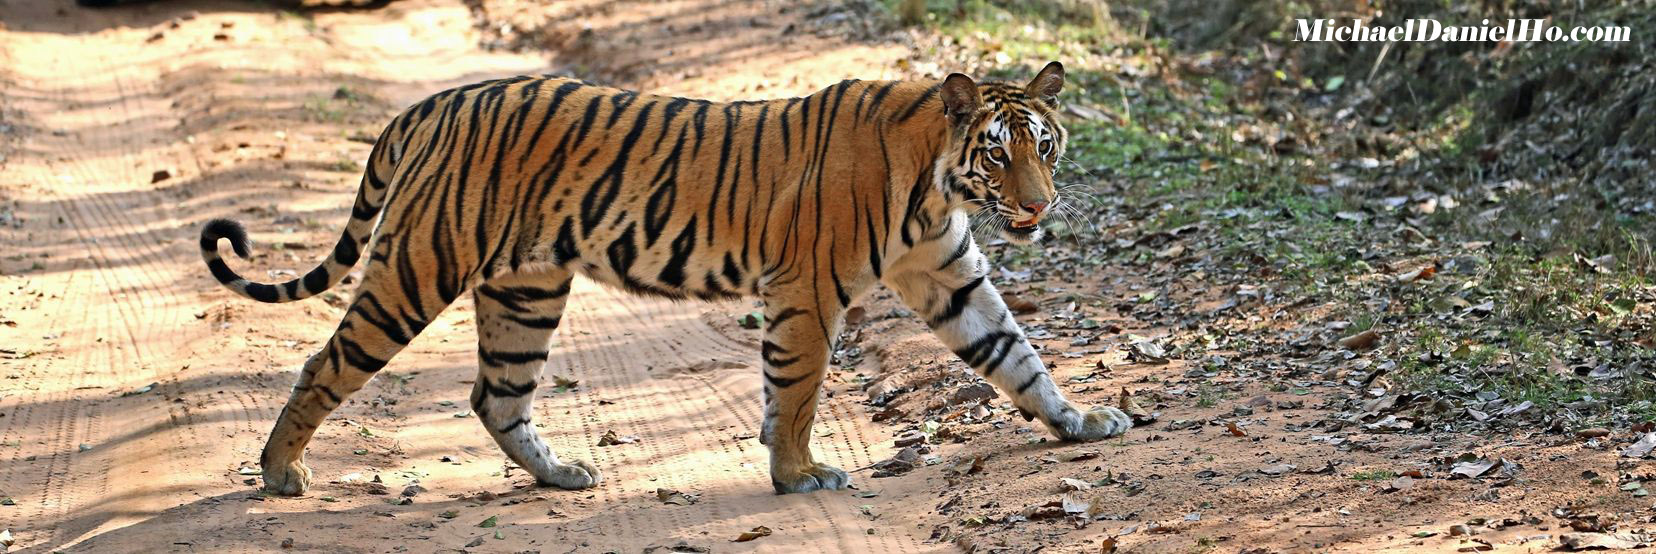 photo of bengal tiger in India